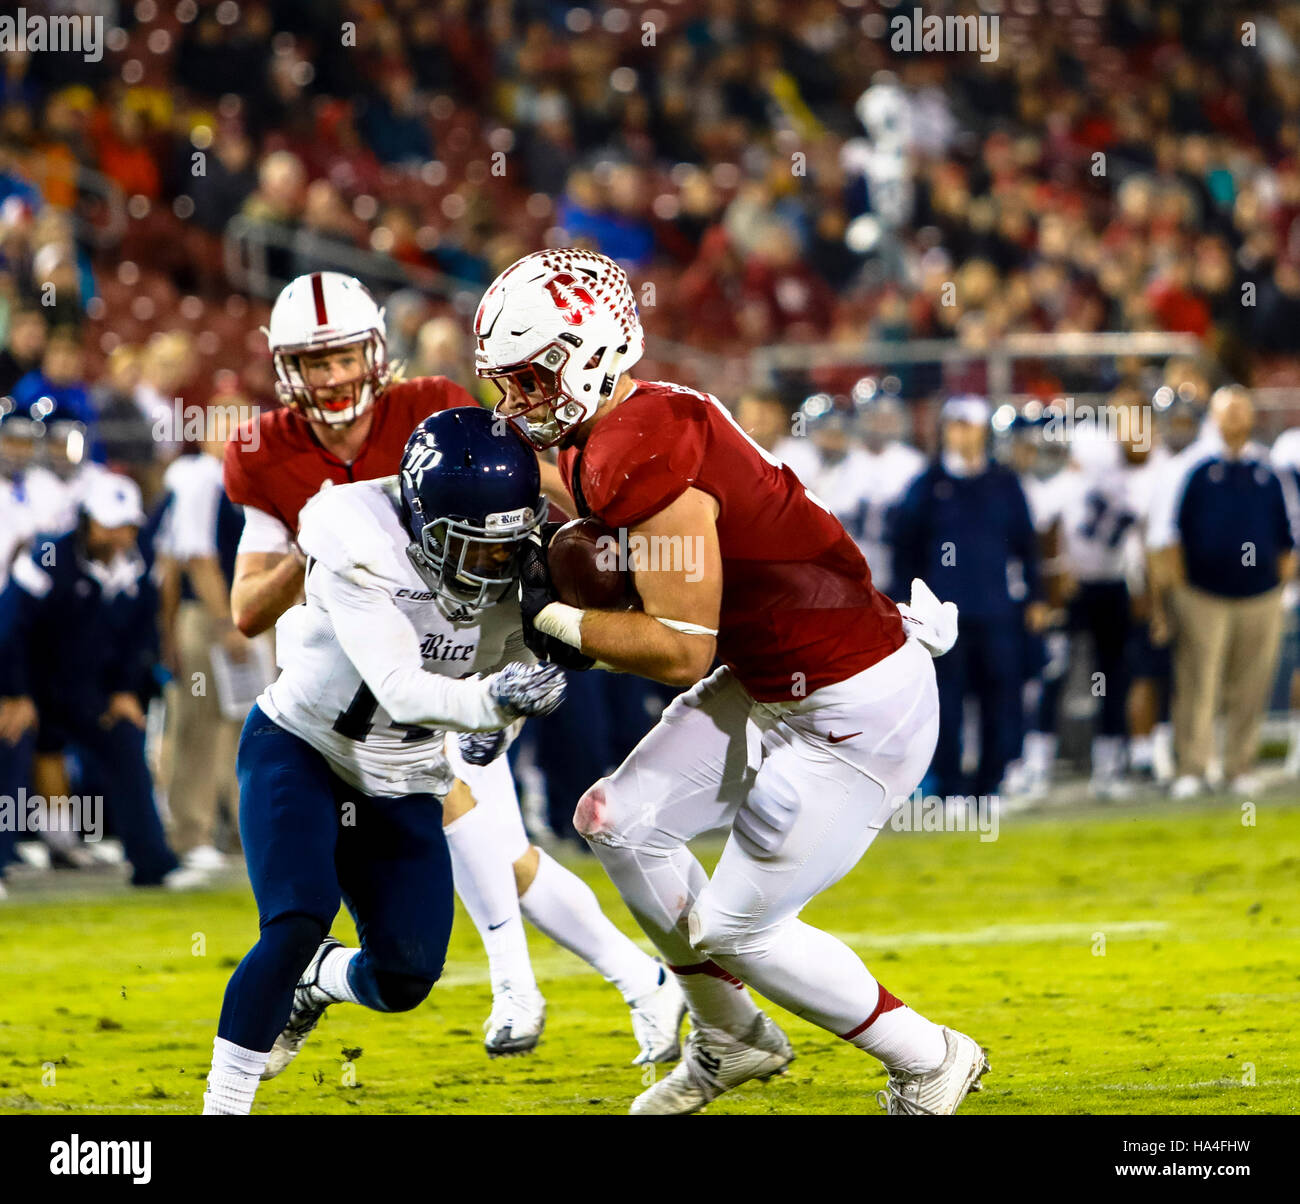 Palo Alto, California, USA. 26th Nov, 2016. Stanford Tight End Dalton Schultz (9) catches a pass in NCAA football action at Stanford University, featuring the Rice Owls visiting the Stanford Cardinal. Stanford won the game 41-17. © Seth Riskin/ZUMA Wire/Alamy Live News Stock Photo